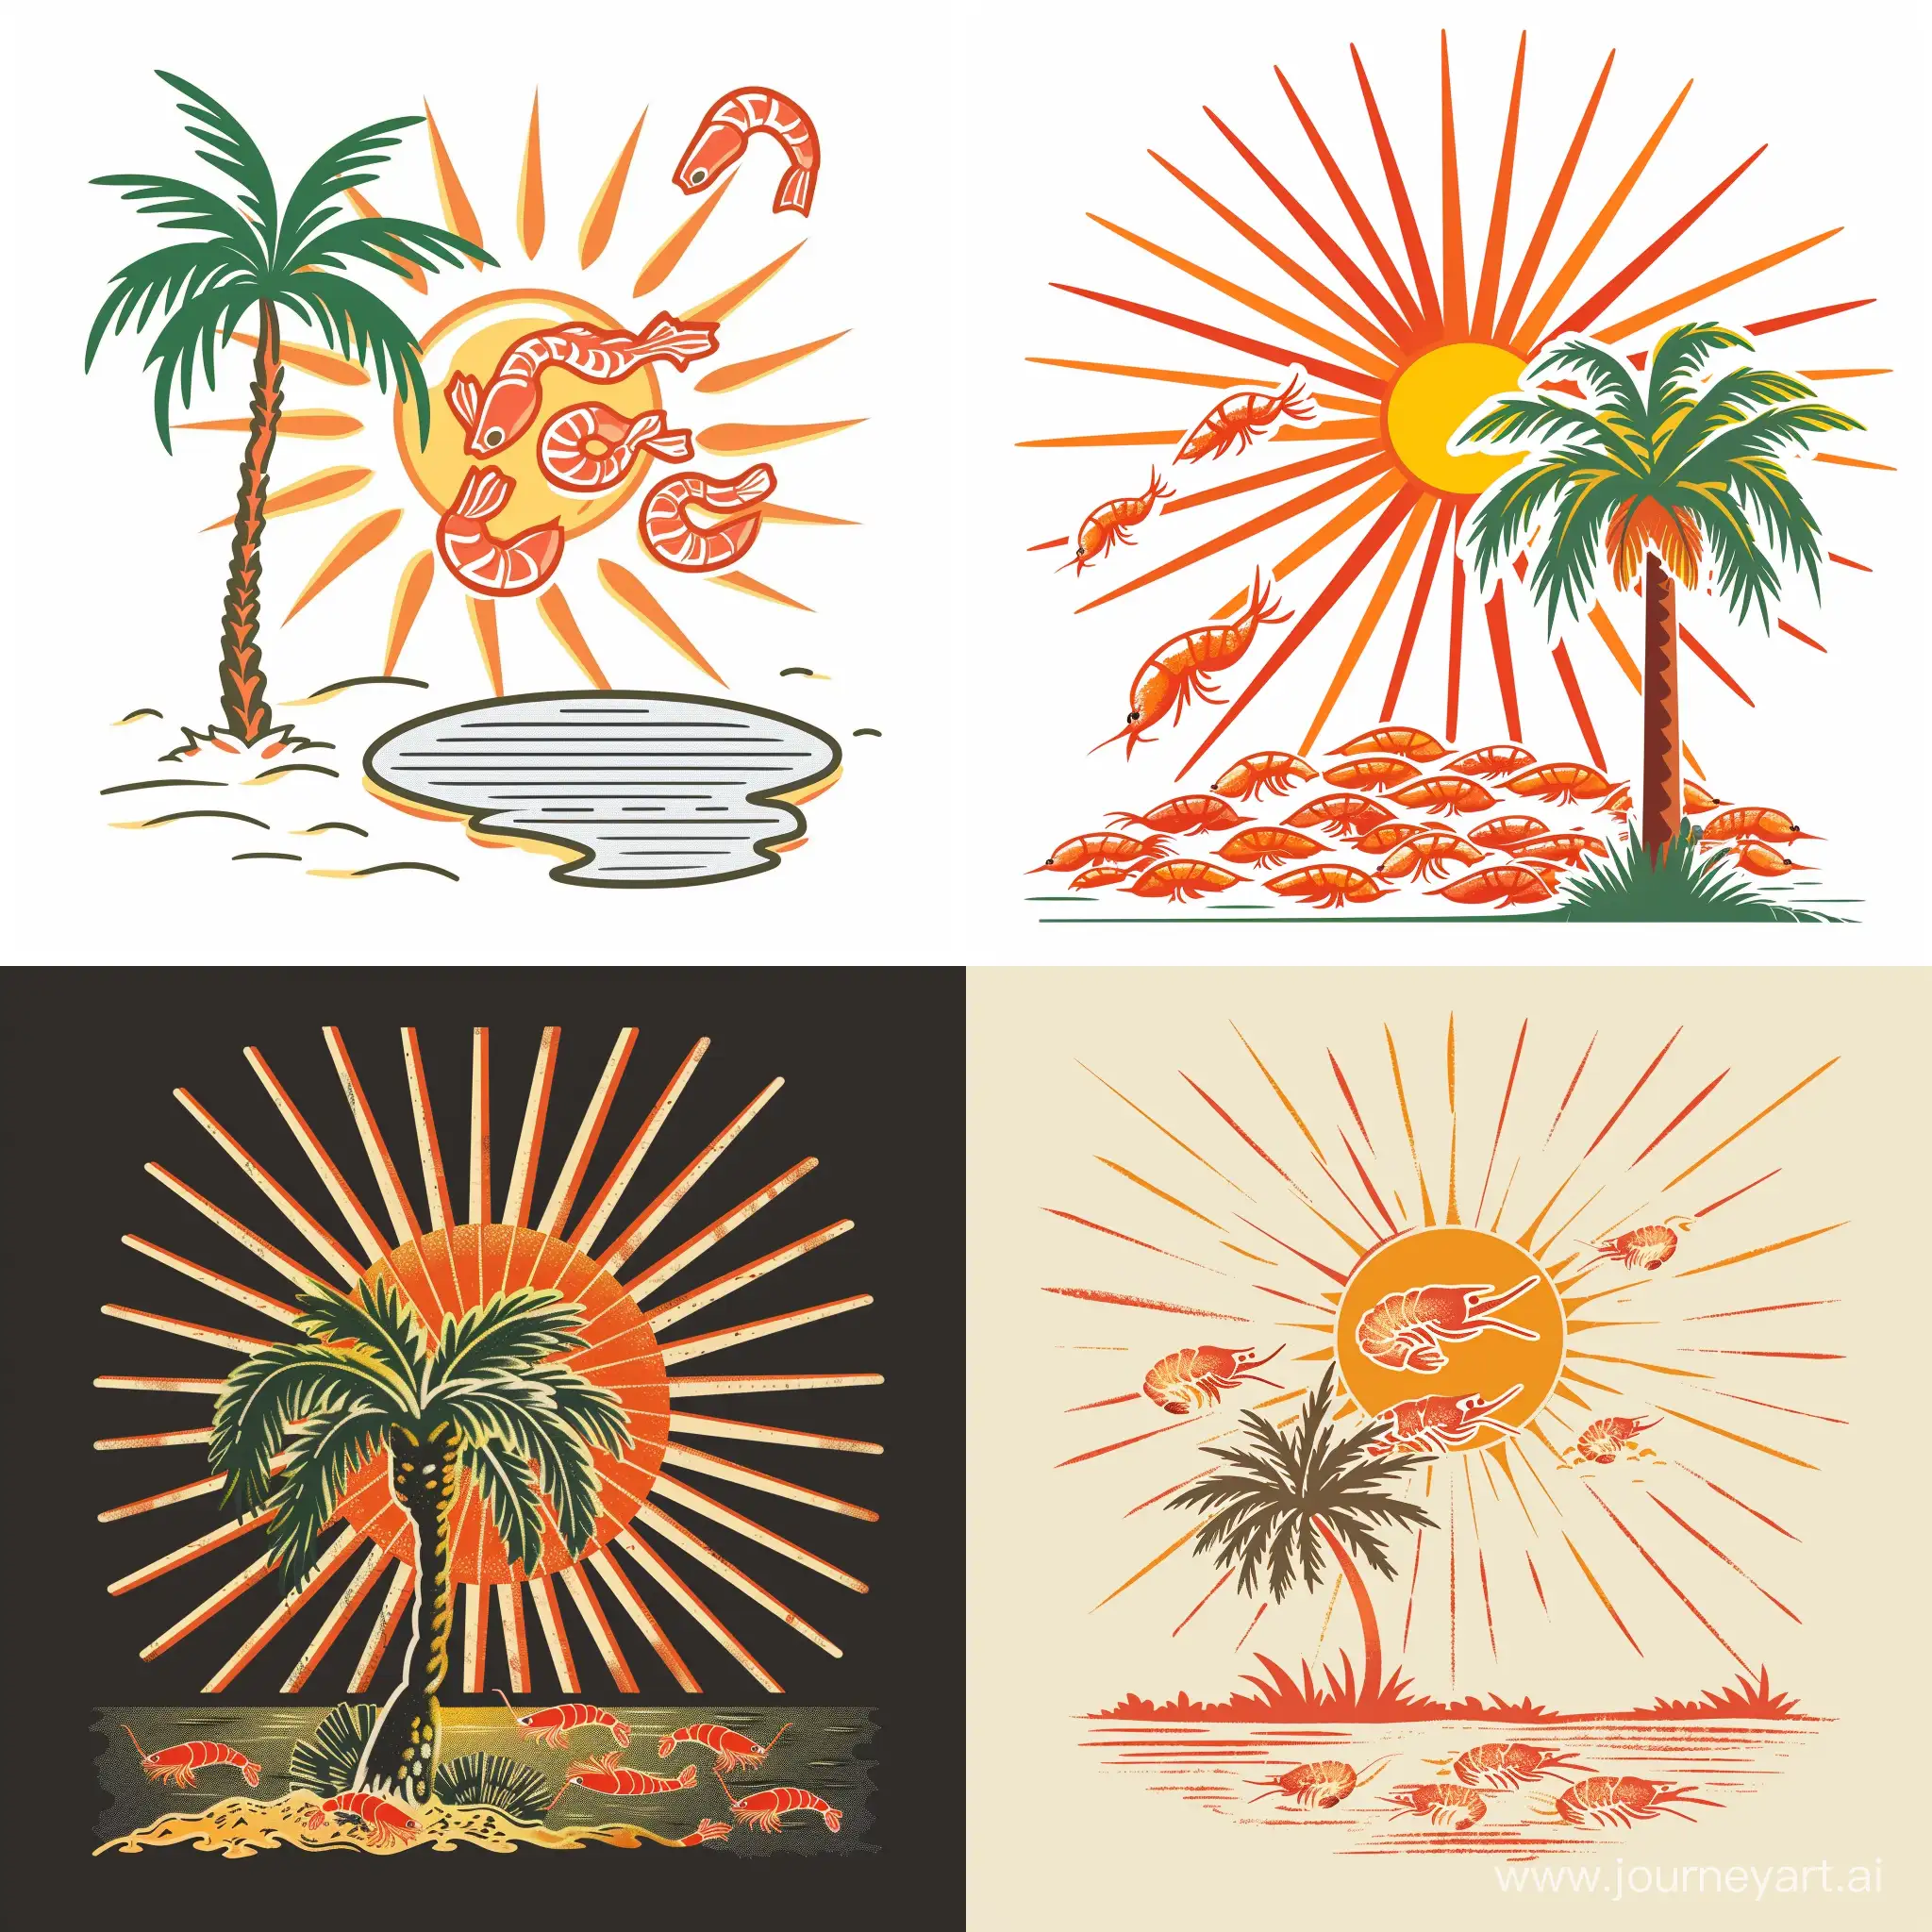 i want a logo Shrimp moving among the rays of the sun: This image can symbolize the dynamism and vitality of the shrimp farming industry.
     Palm tree next to shrimp pond: This image can be a symbol of human interaction with nature in this industry.
     Using colors related to the south of Iran: Using warm and happy colors such as orange, yellow and red can increase the visual appeal of your logo.